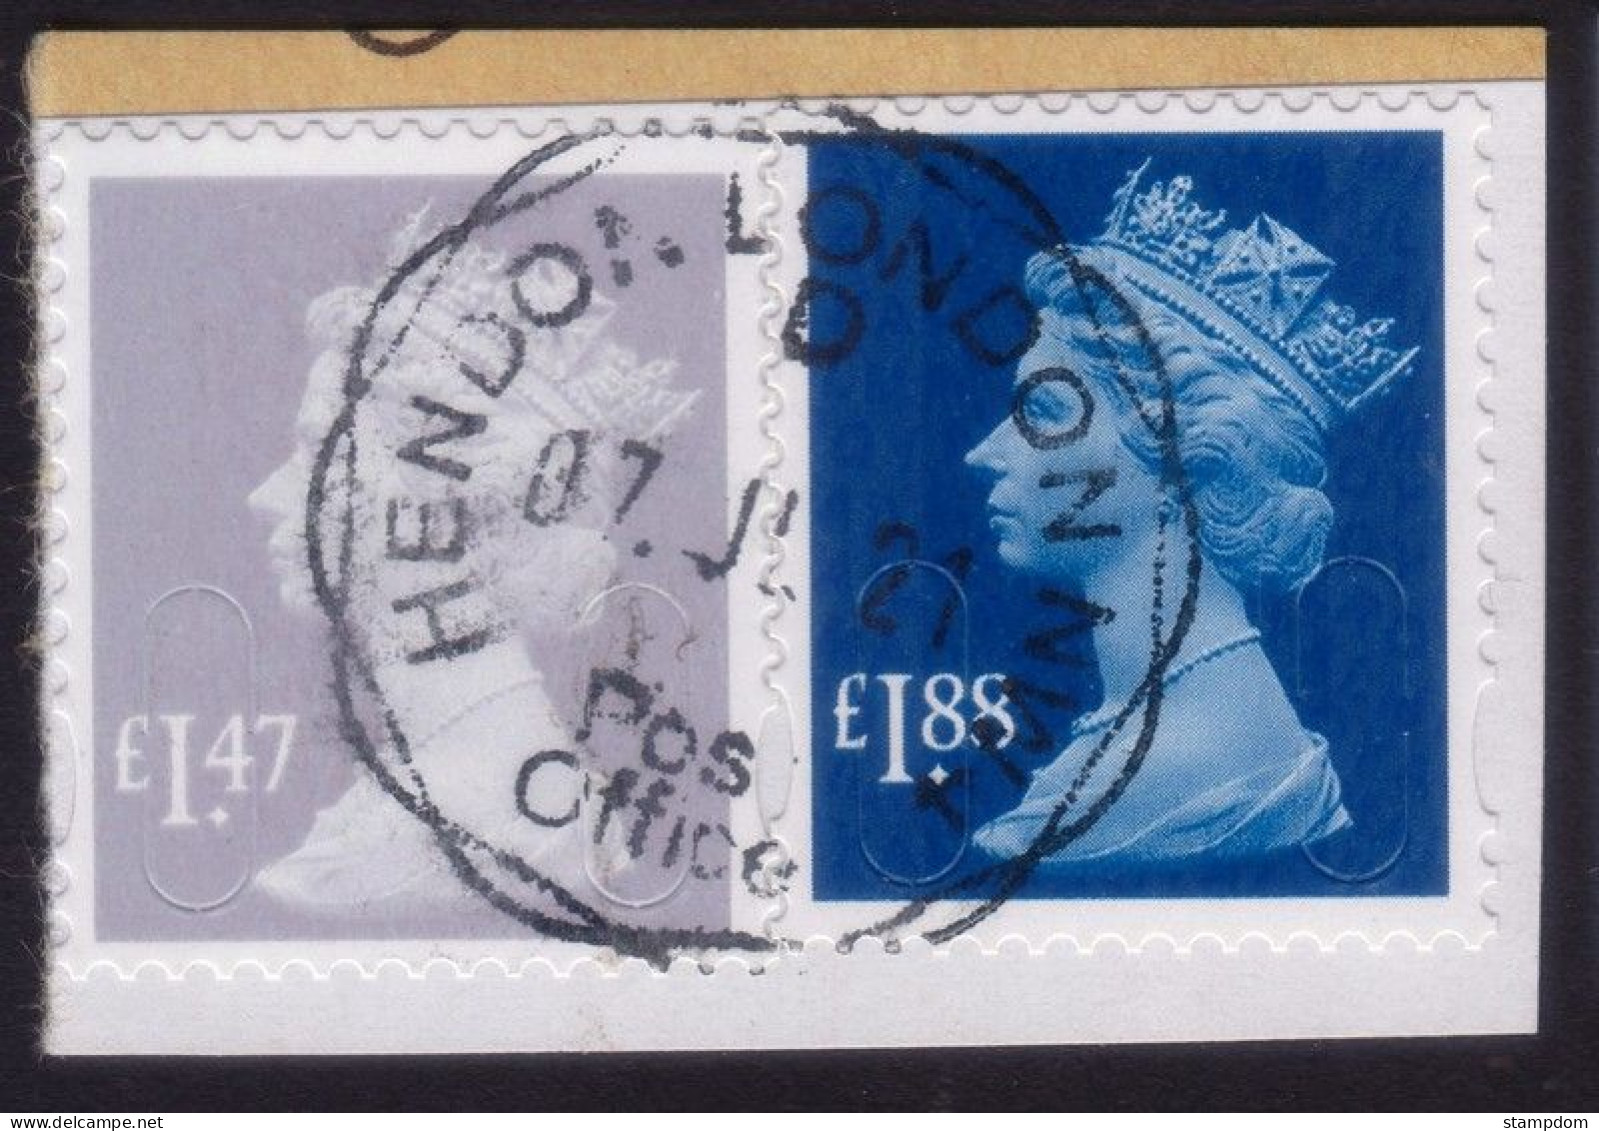 GREAT BRITAIN £1.47 (M4L) And £1.88 (MA13) Machin - USED On Paper "Hendon London NW4" Pmk @Q2795 - Machins